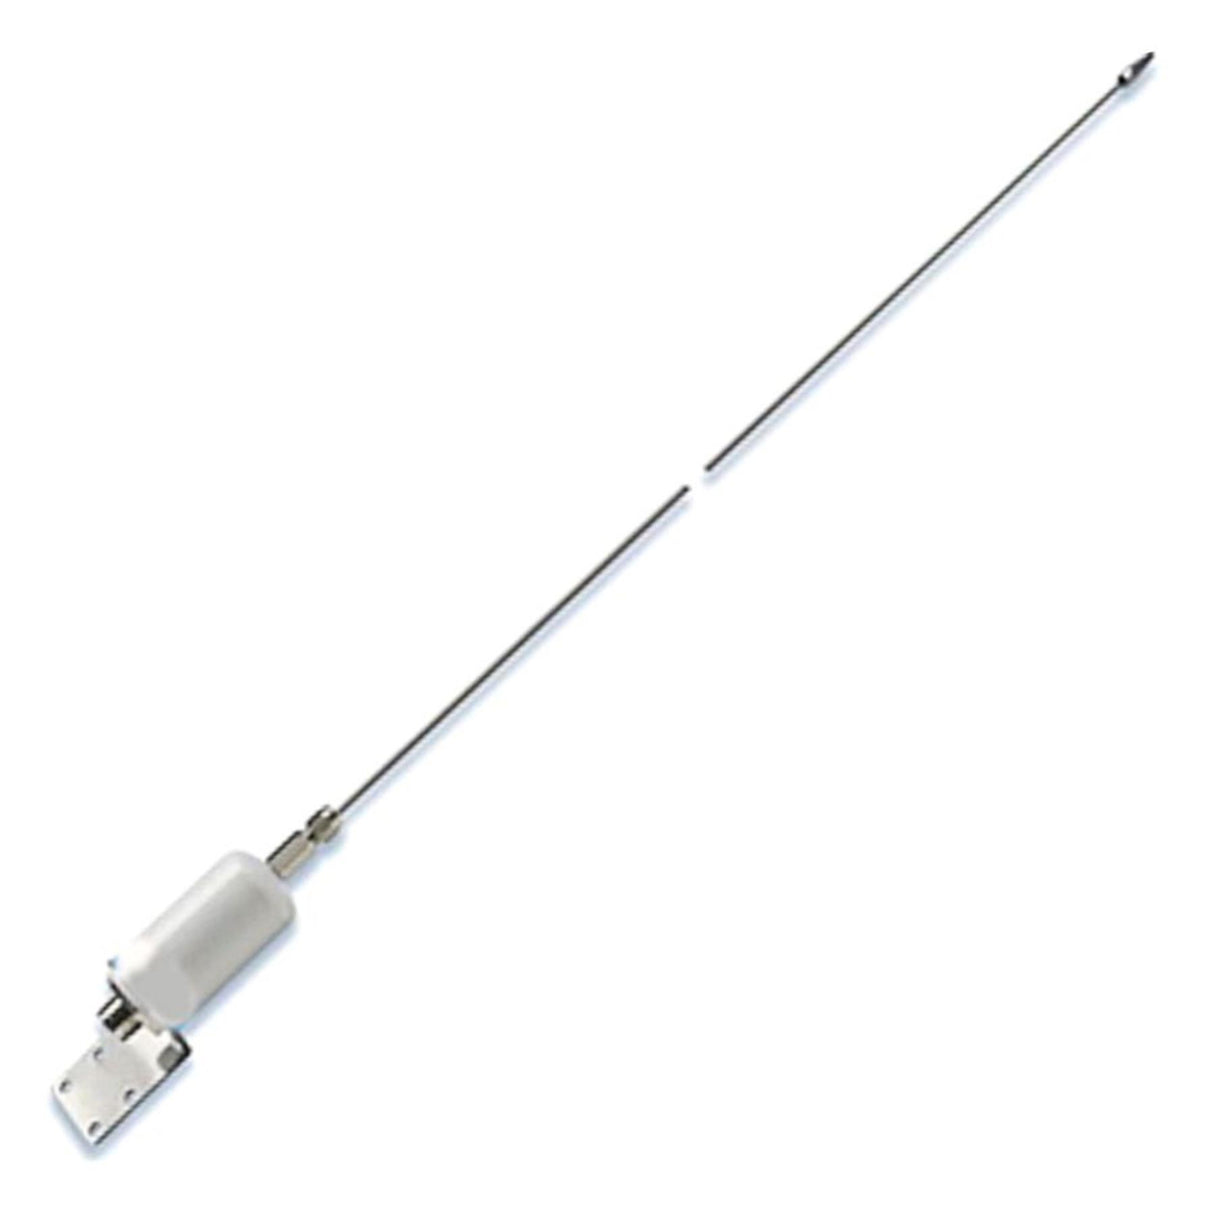 Navico 1720 VHF Antenna, 1.1 M (3 Ft) with Stainless Masthead Whip & Bracket